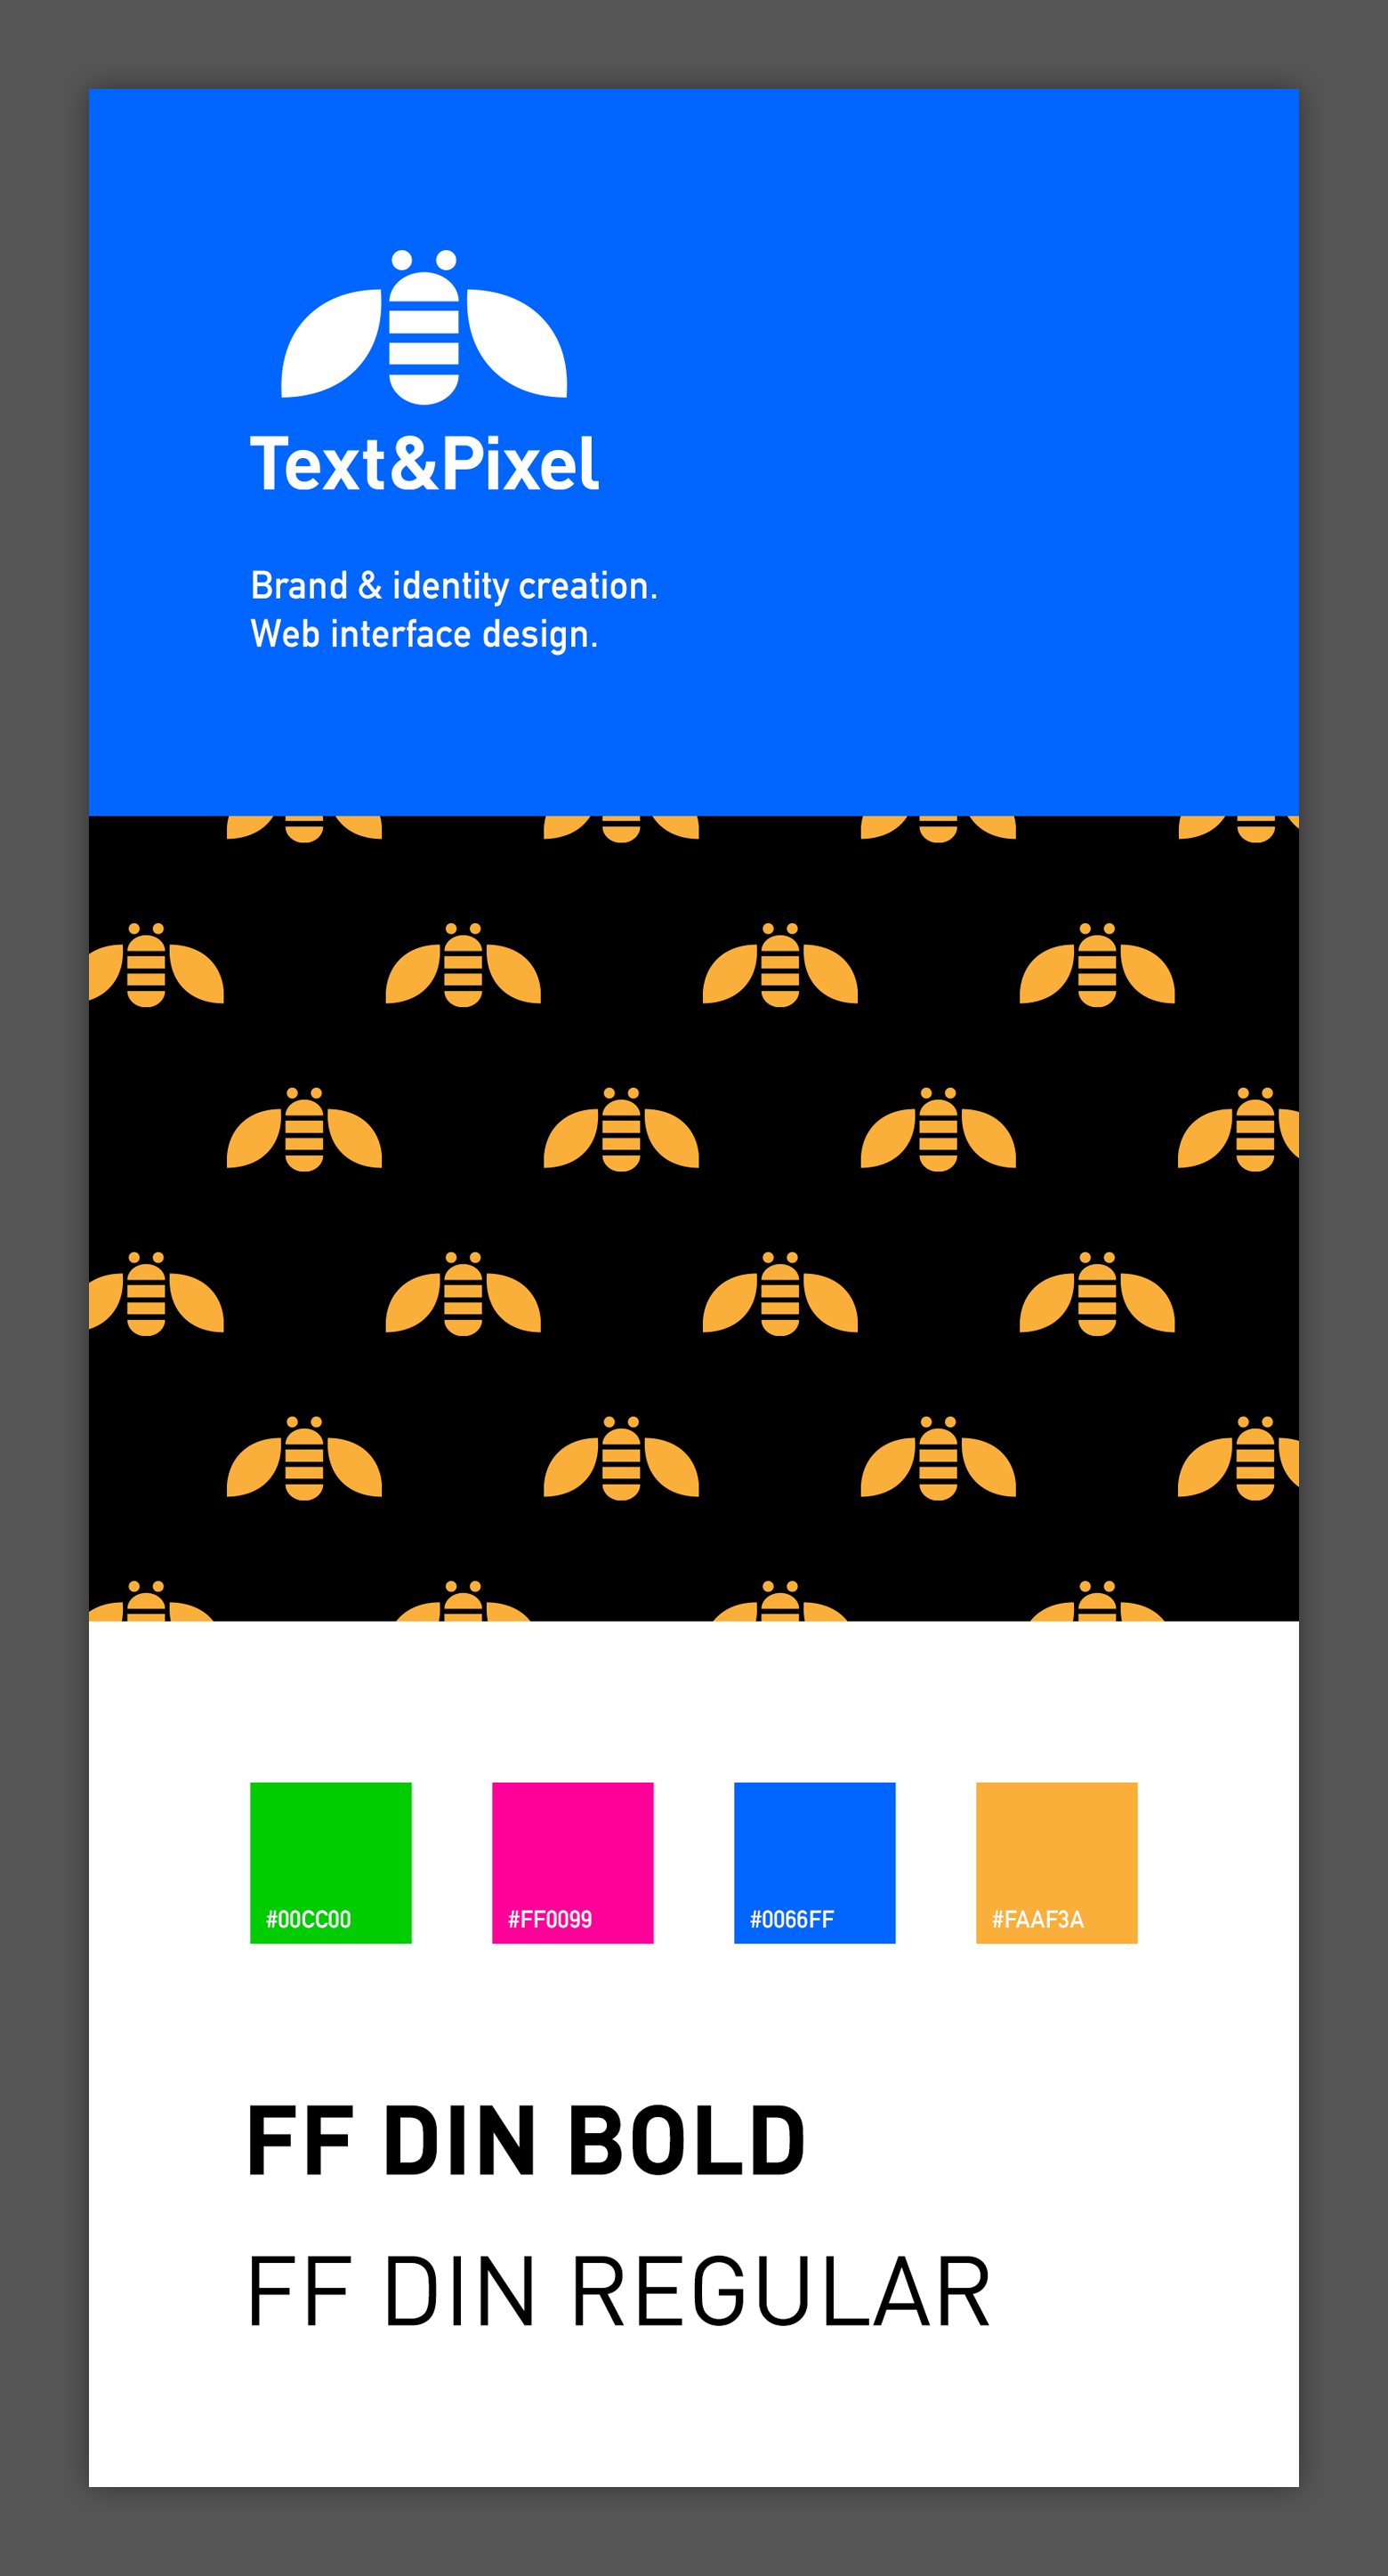 Text&Pixel identity card with logo, primary colours and a pattern of goldan bees against a black background